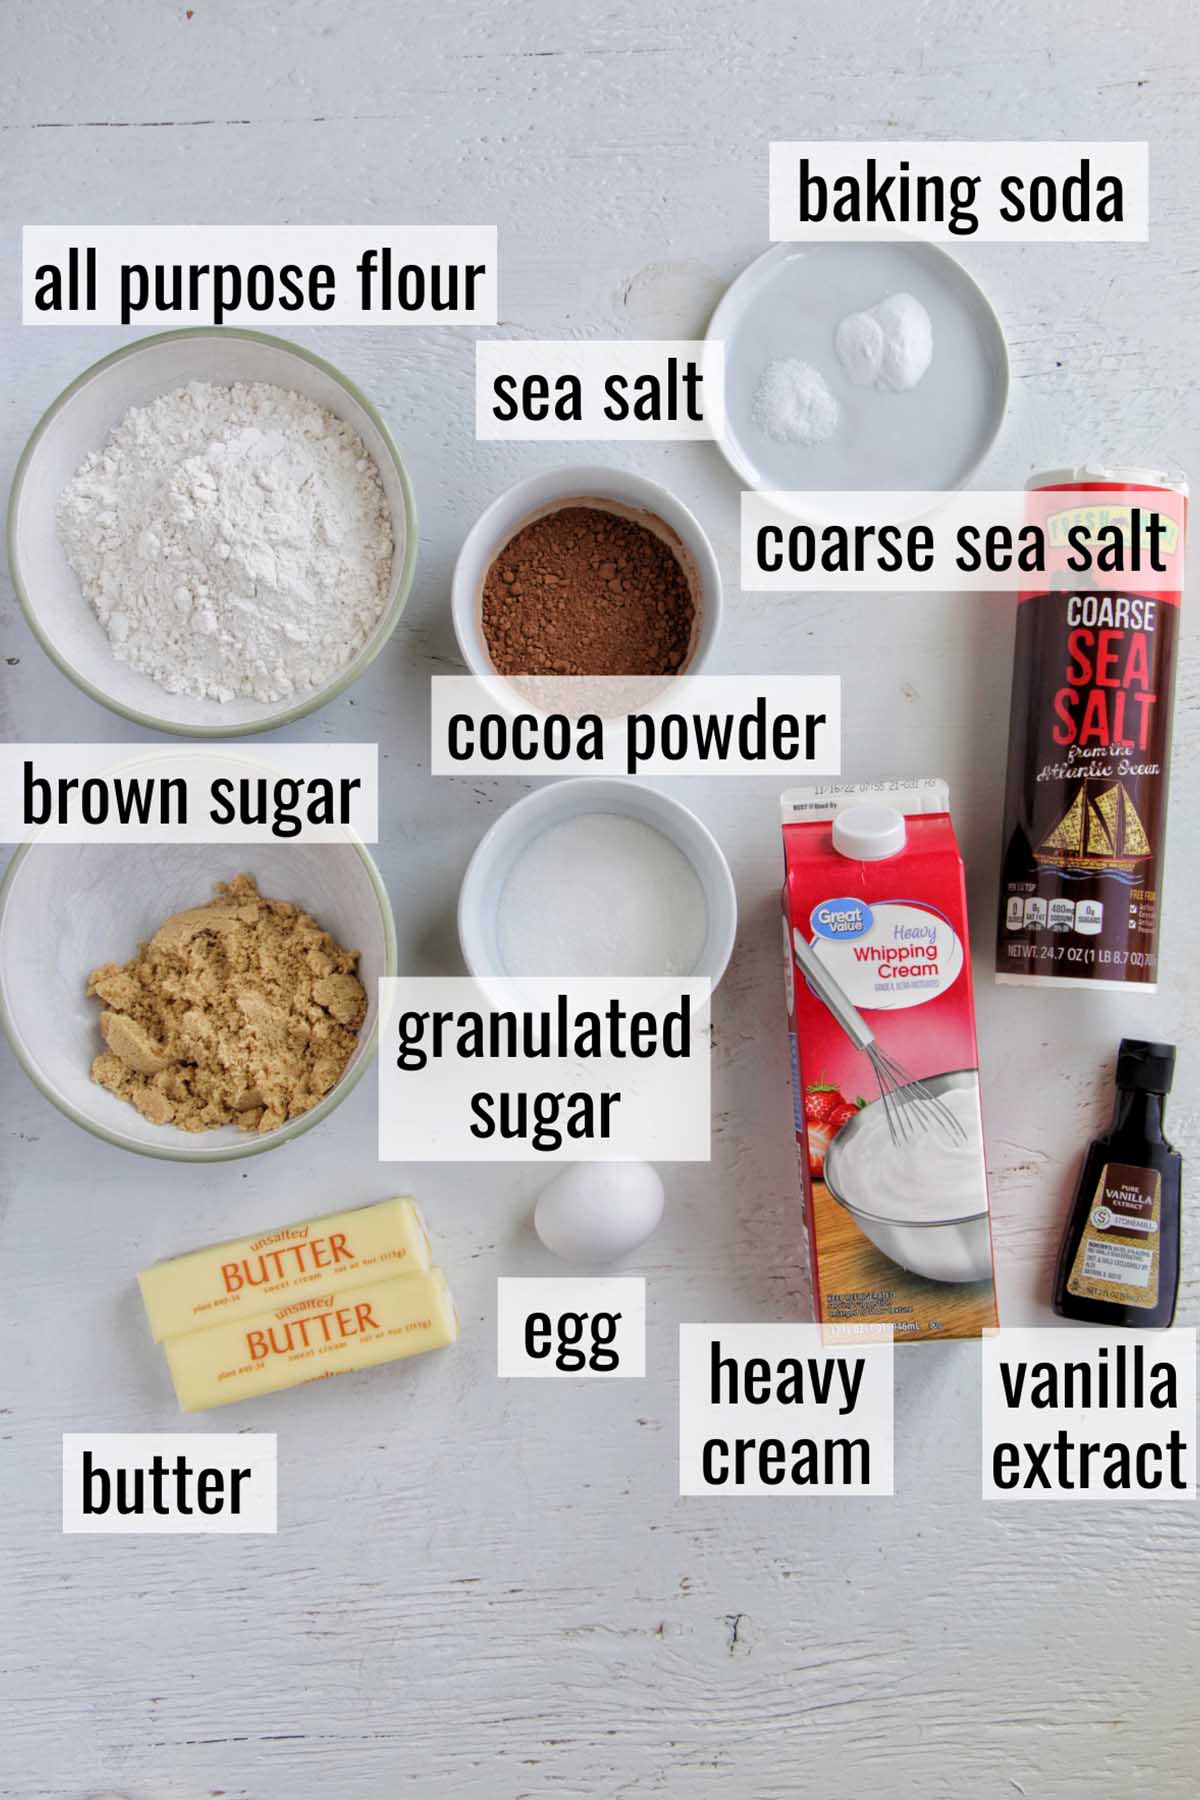 salted caramel thumbprint cookie ingredients with labels.